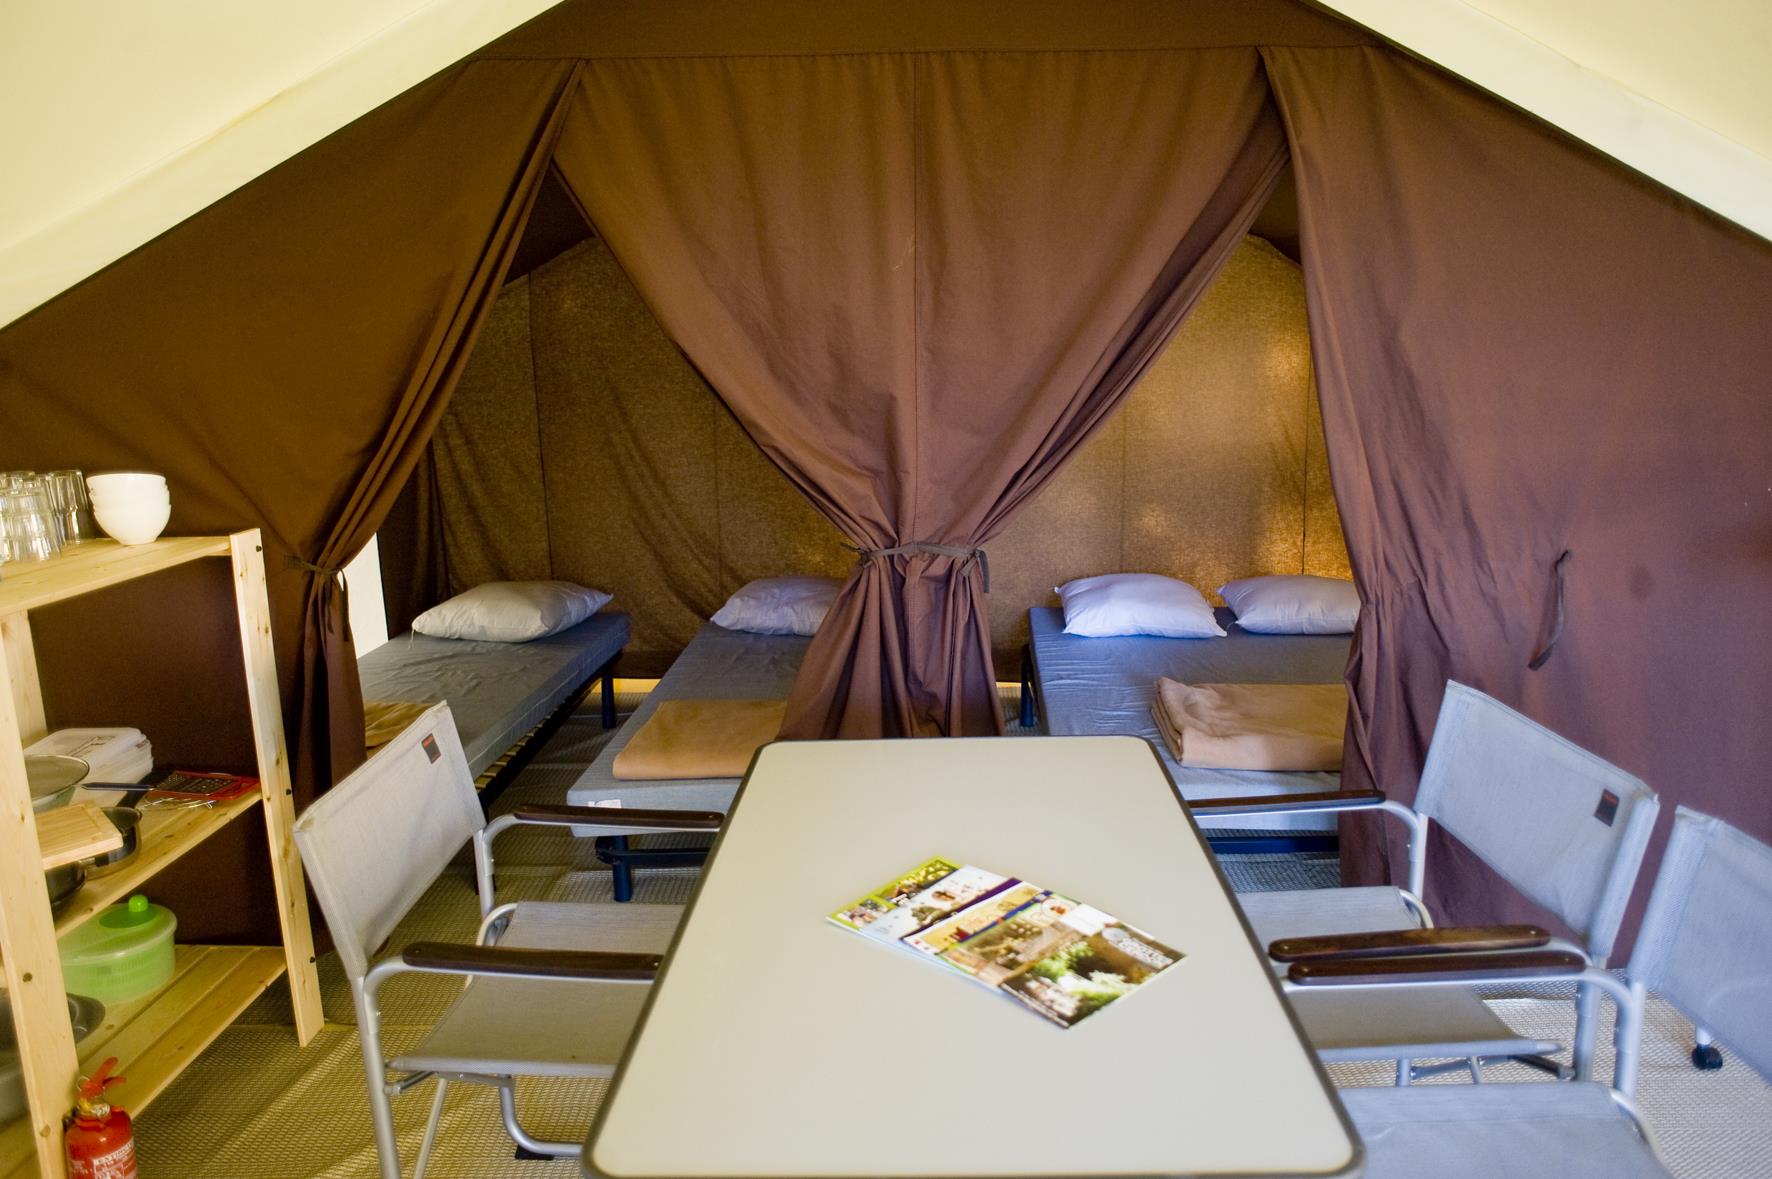 Accommodation - Wood & Canvas Tent Classic Iv - Huttopia Lac d’Aiguebelette